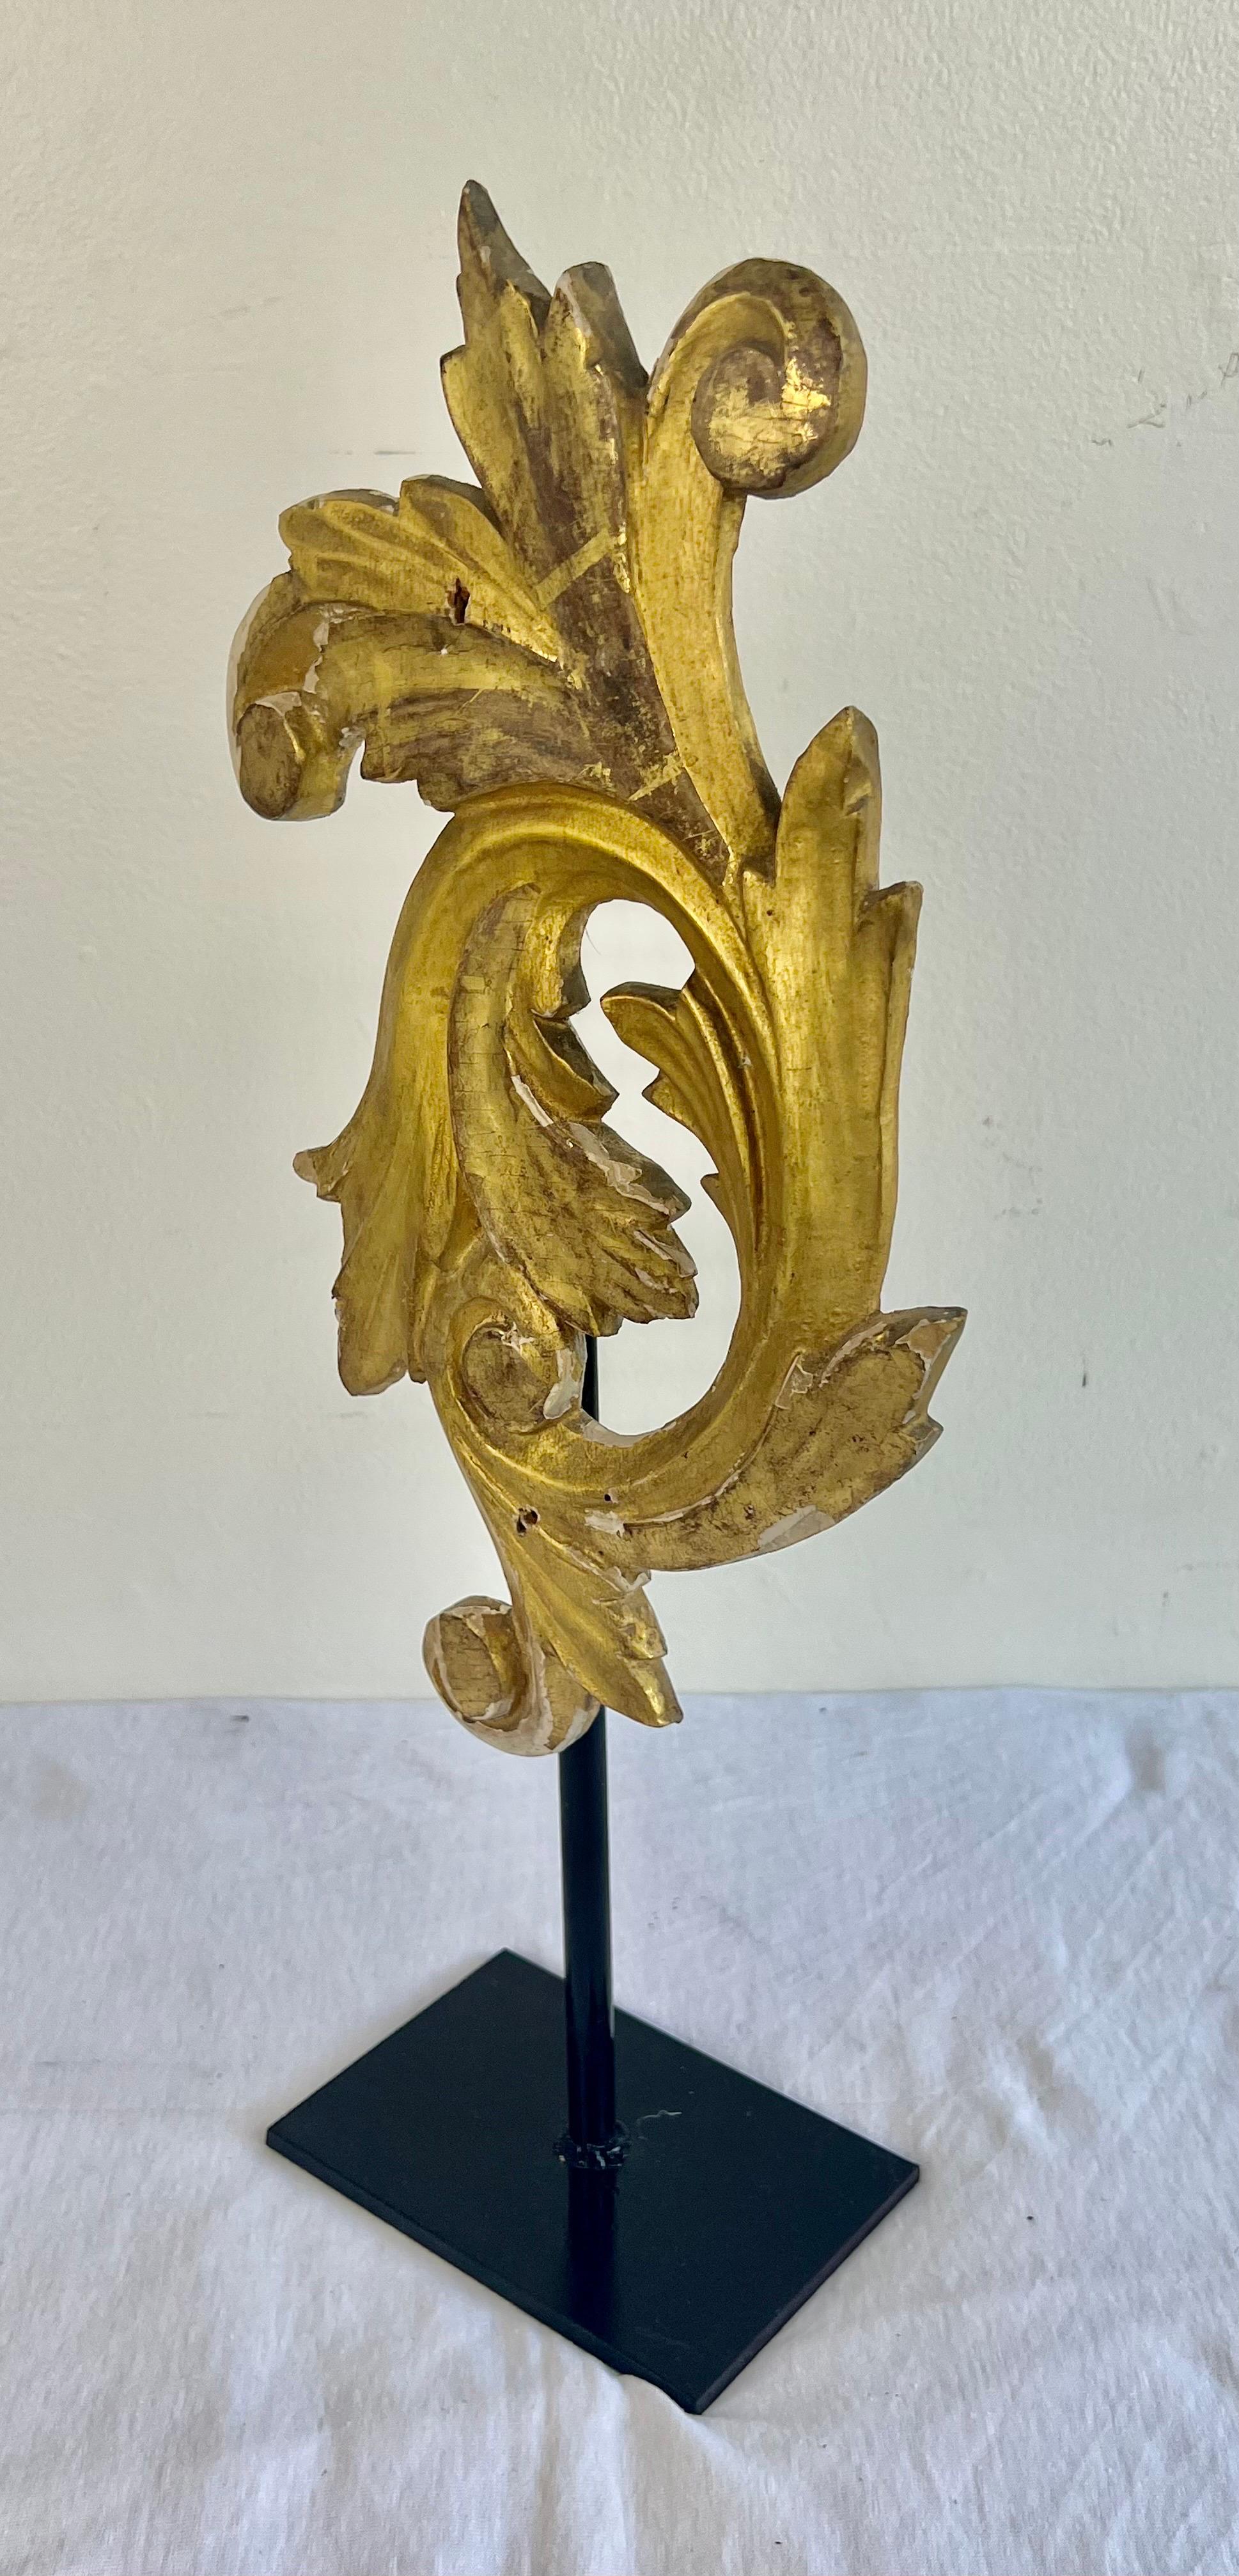 19th century gilt wood carved architectural remnant shaped like a swirling acanthus leaf.  The acanthus leaf is mounted to an iron base for decor.  This would be great on an end table or bookshelf for display.